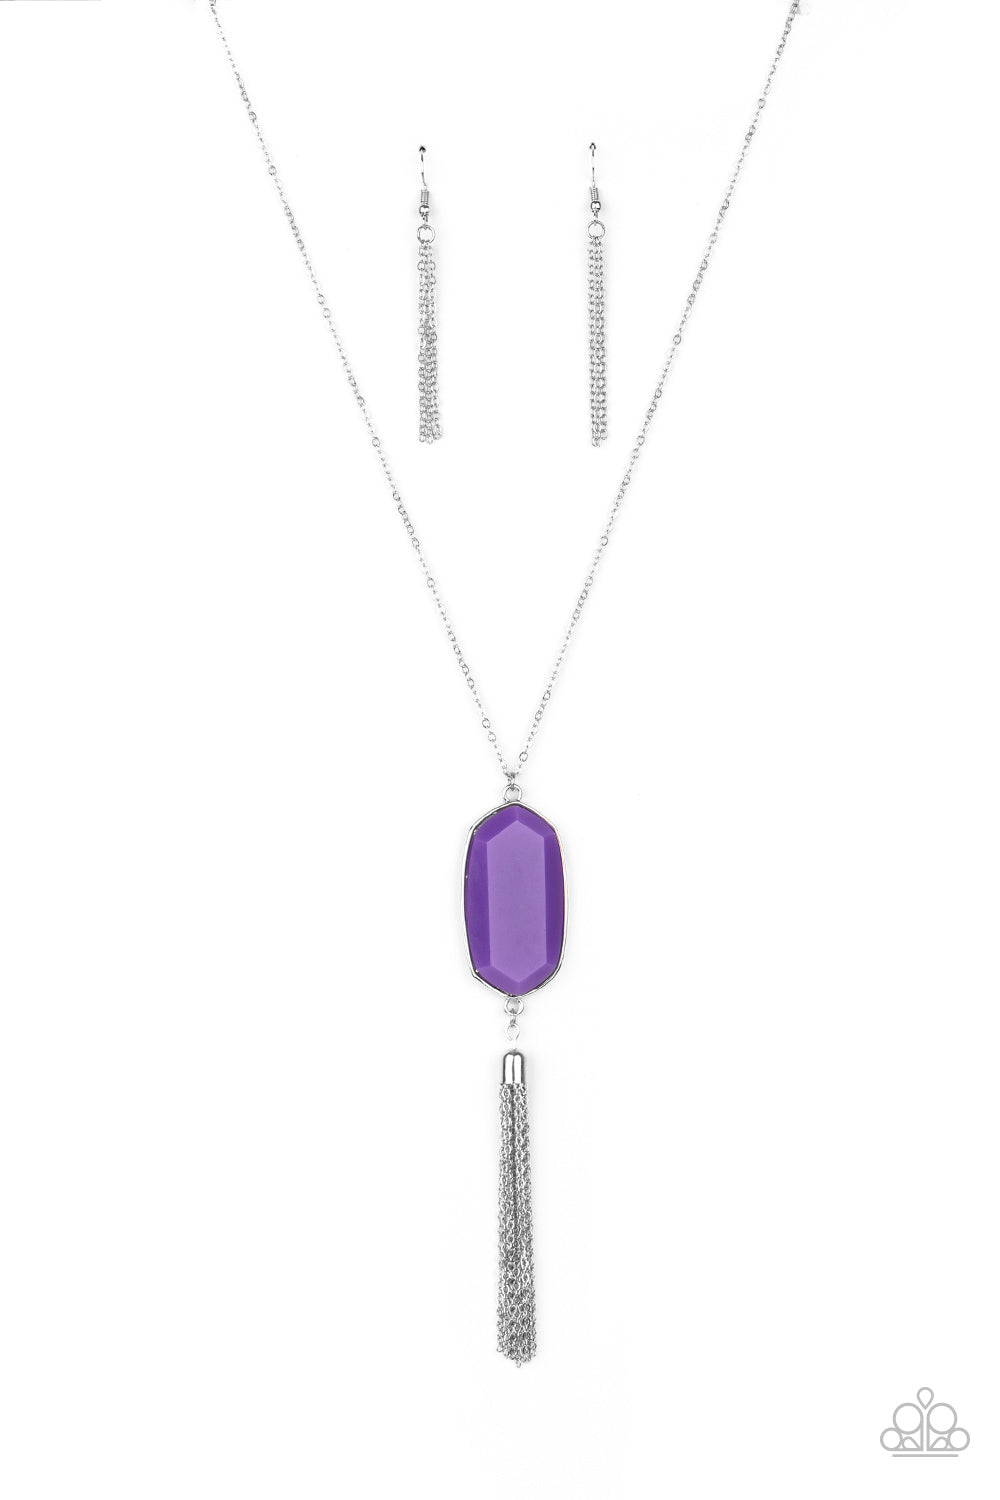 Paparazzi Accessories - Got A Good Thing GLOWING - Purple Necklace - Alies Bling Bar